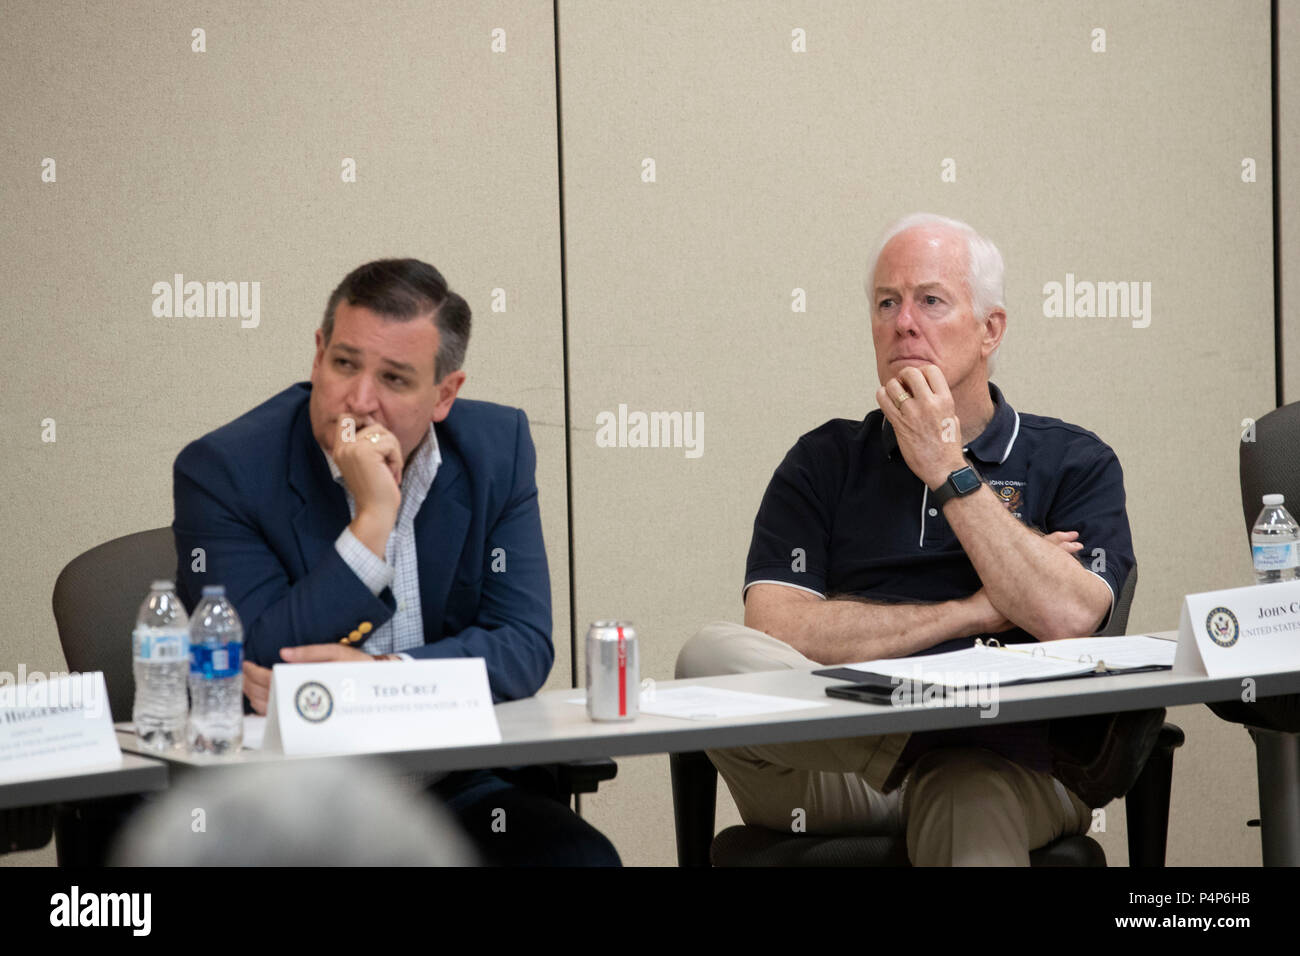 U.S. Senators Ted Cruz, left, and John Cornyn listen as federal and Texas officials and stakeholders meet in a round-table discussion of the immigration crisis hitting the Texas-Mexico border. Confusion and public outrage reigned regarding the Trump administration's policy of separating undocumented immigrant parents from their children after crossing into the U.S. from Mexico. Stock Photo